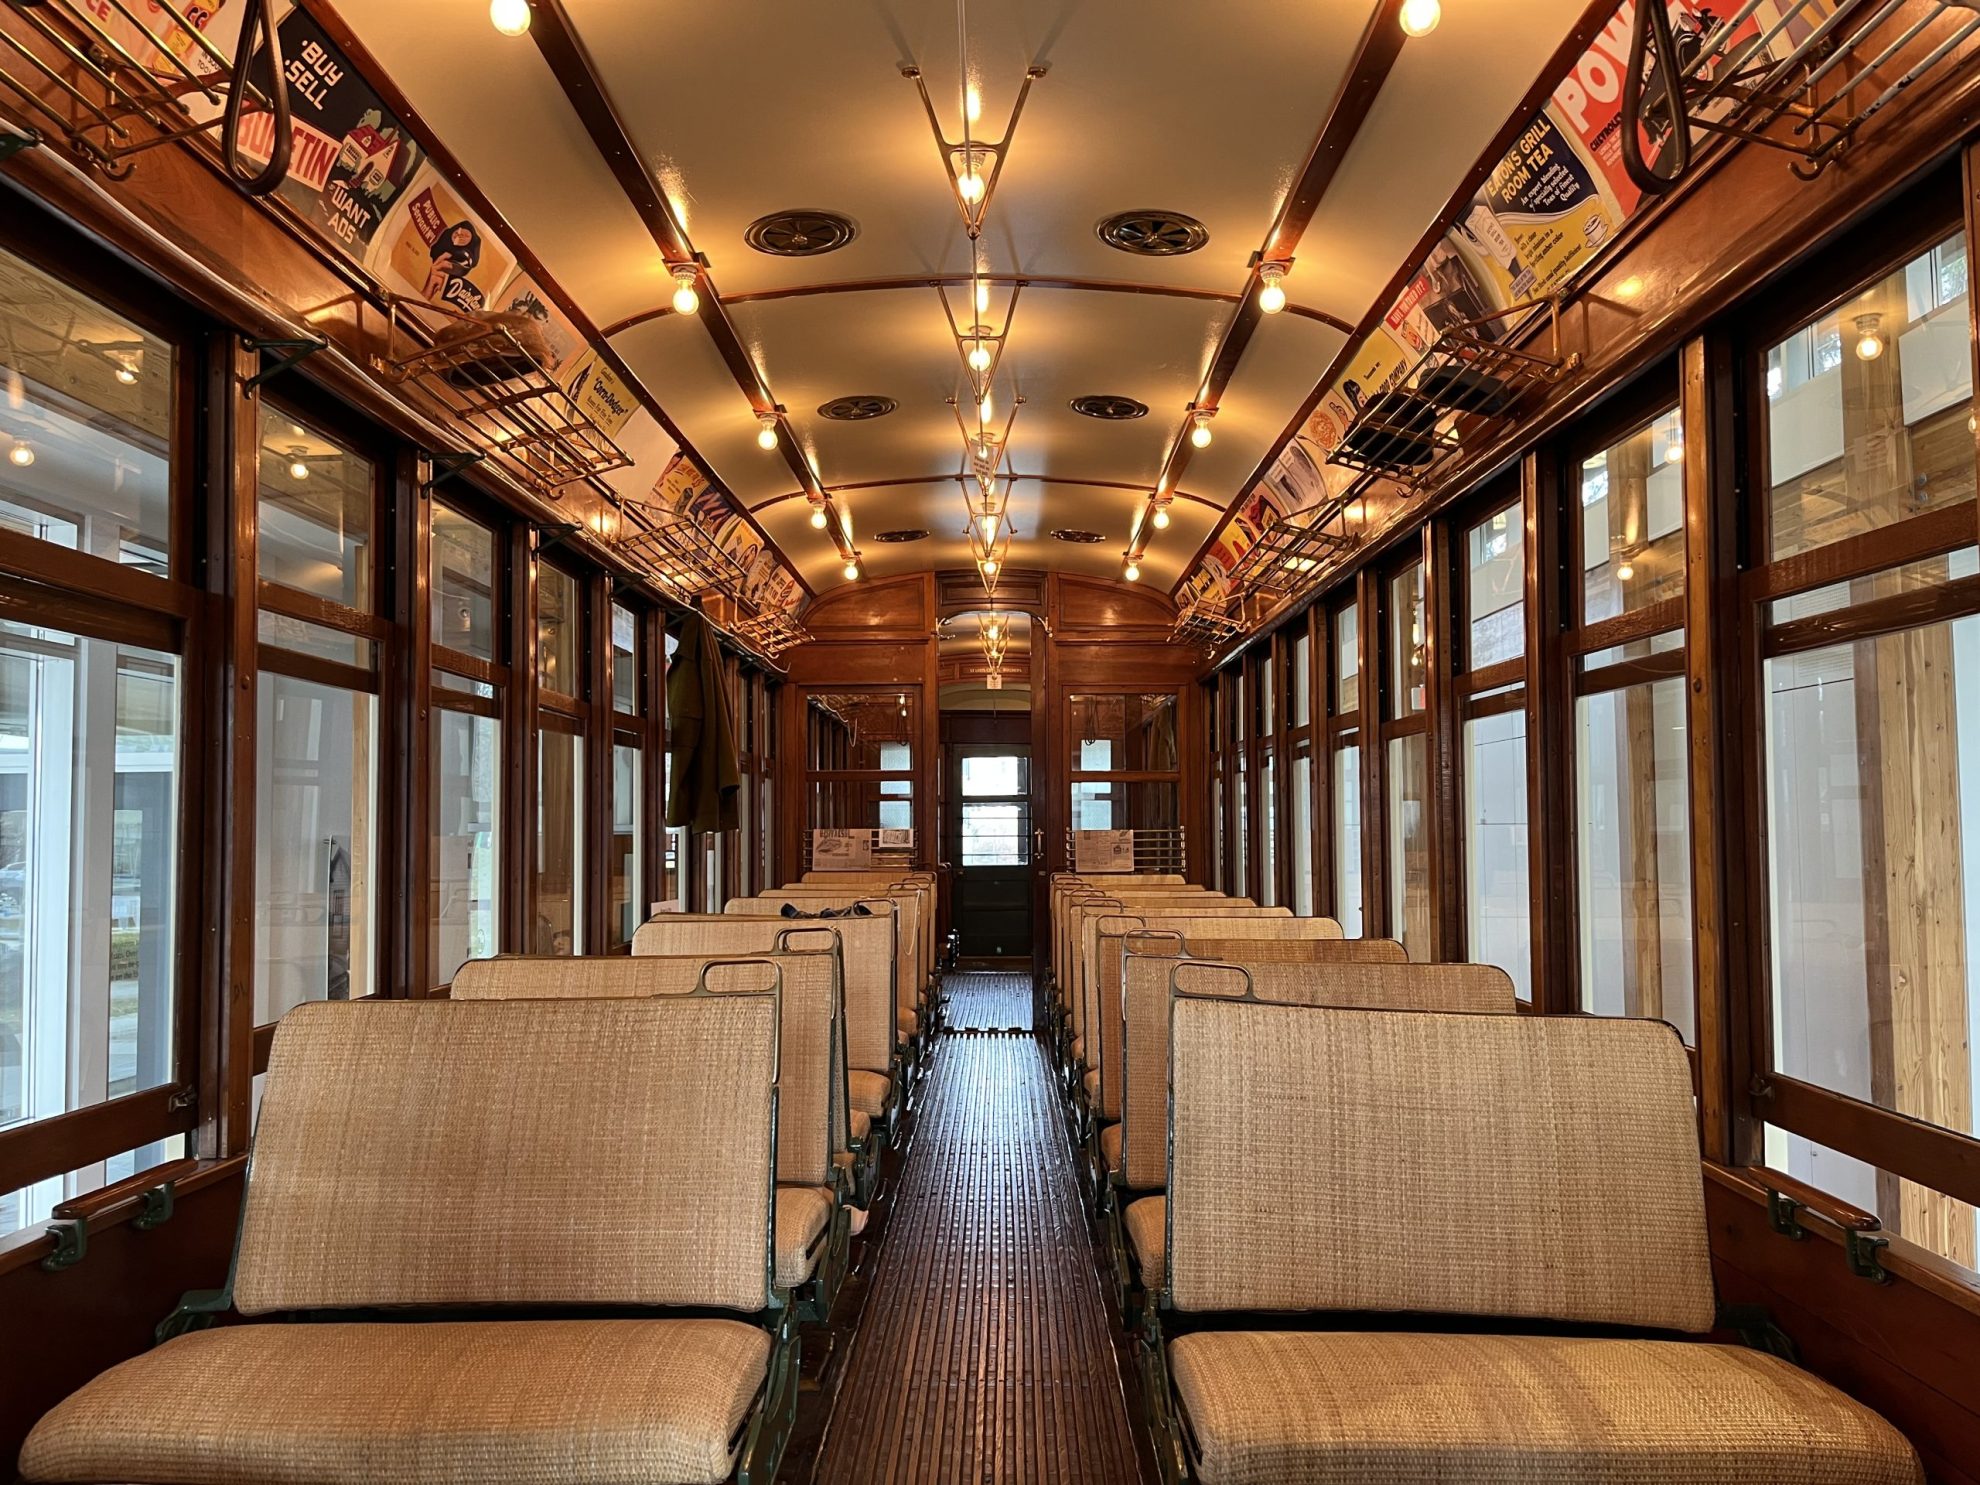 Interior of a wooden tram car lined two rows of wicker chairs and vintage advertising posters hung on the sides.